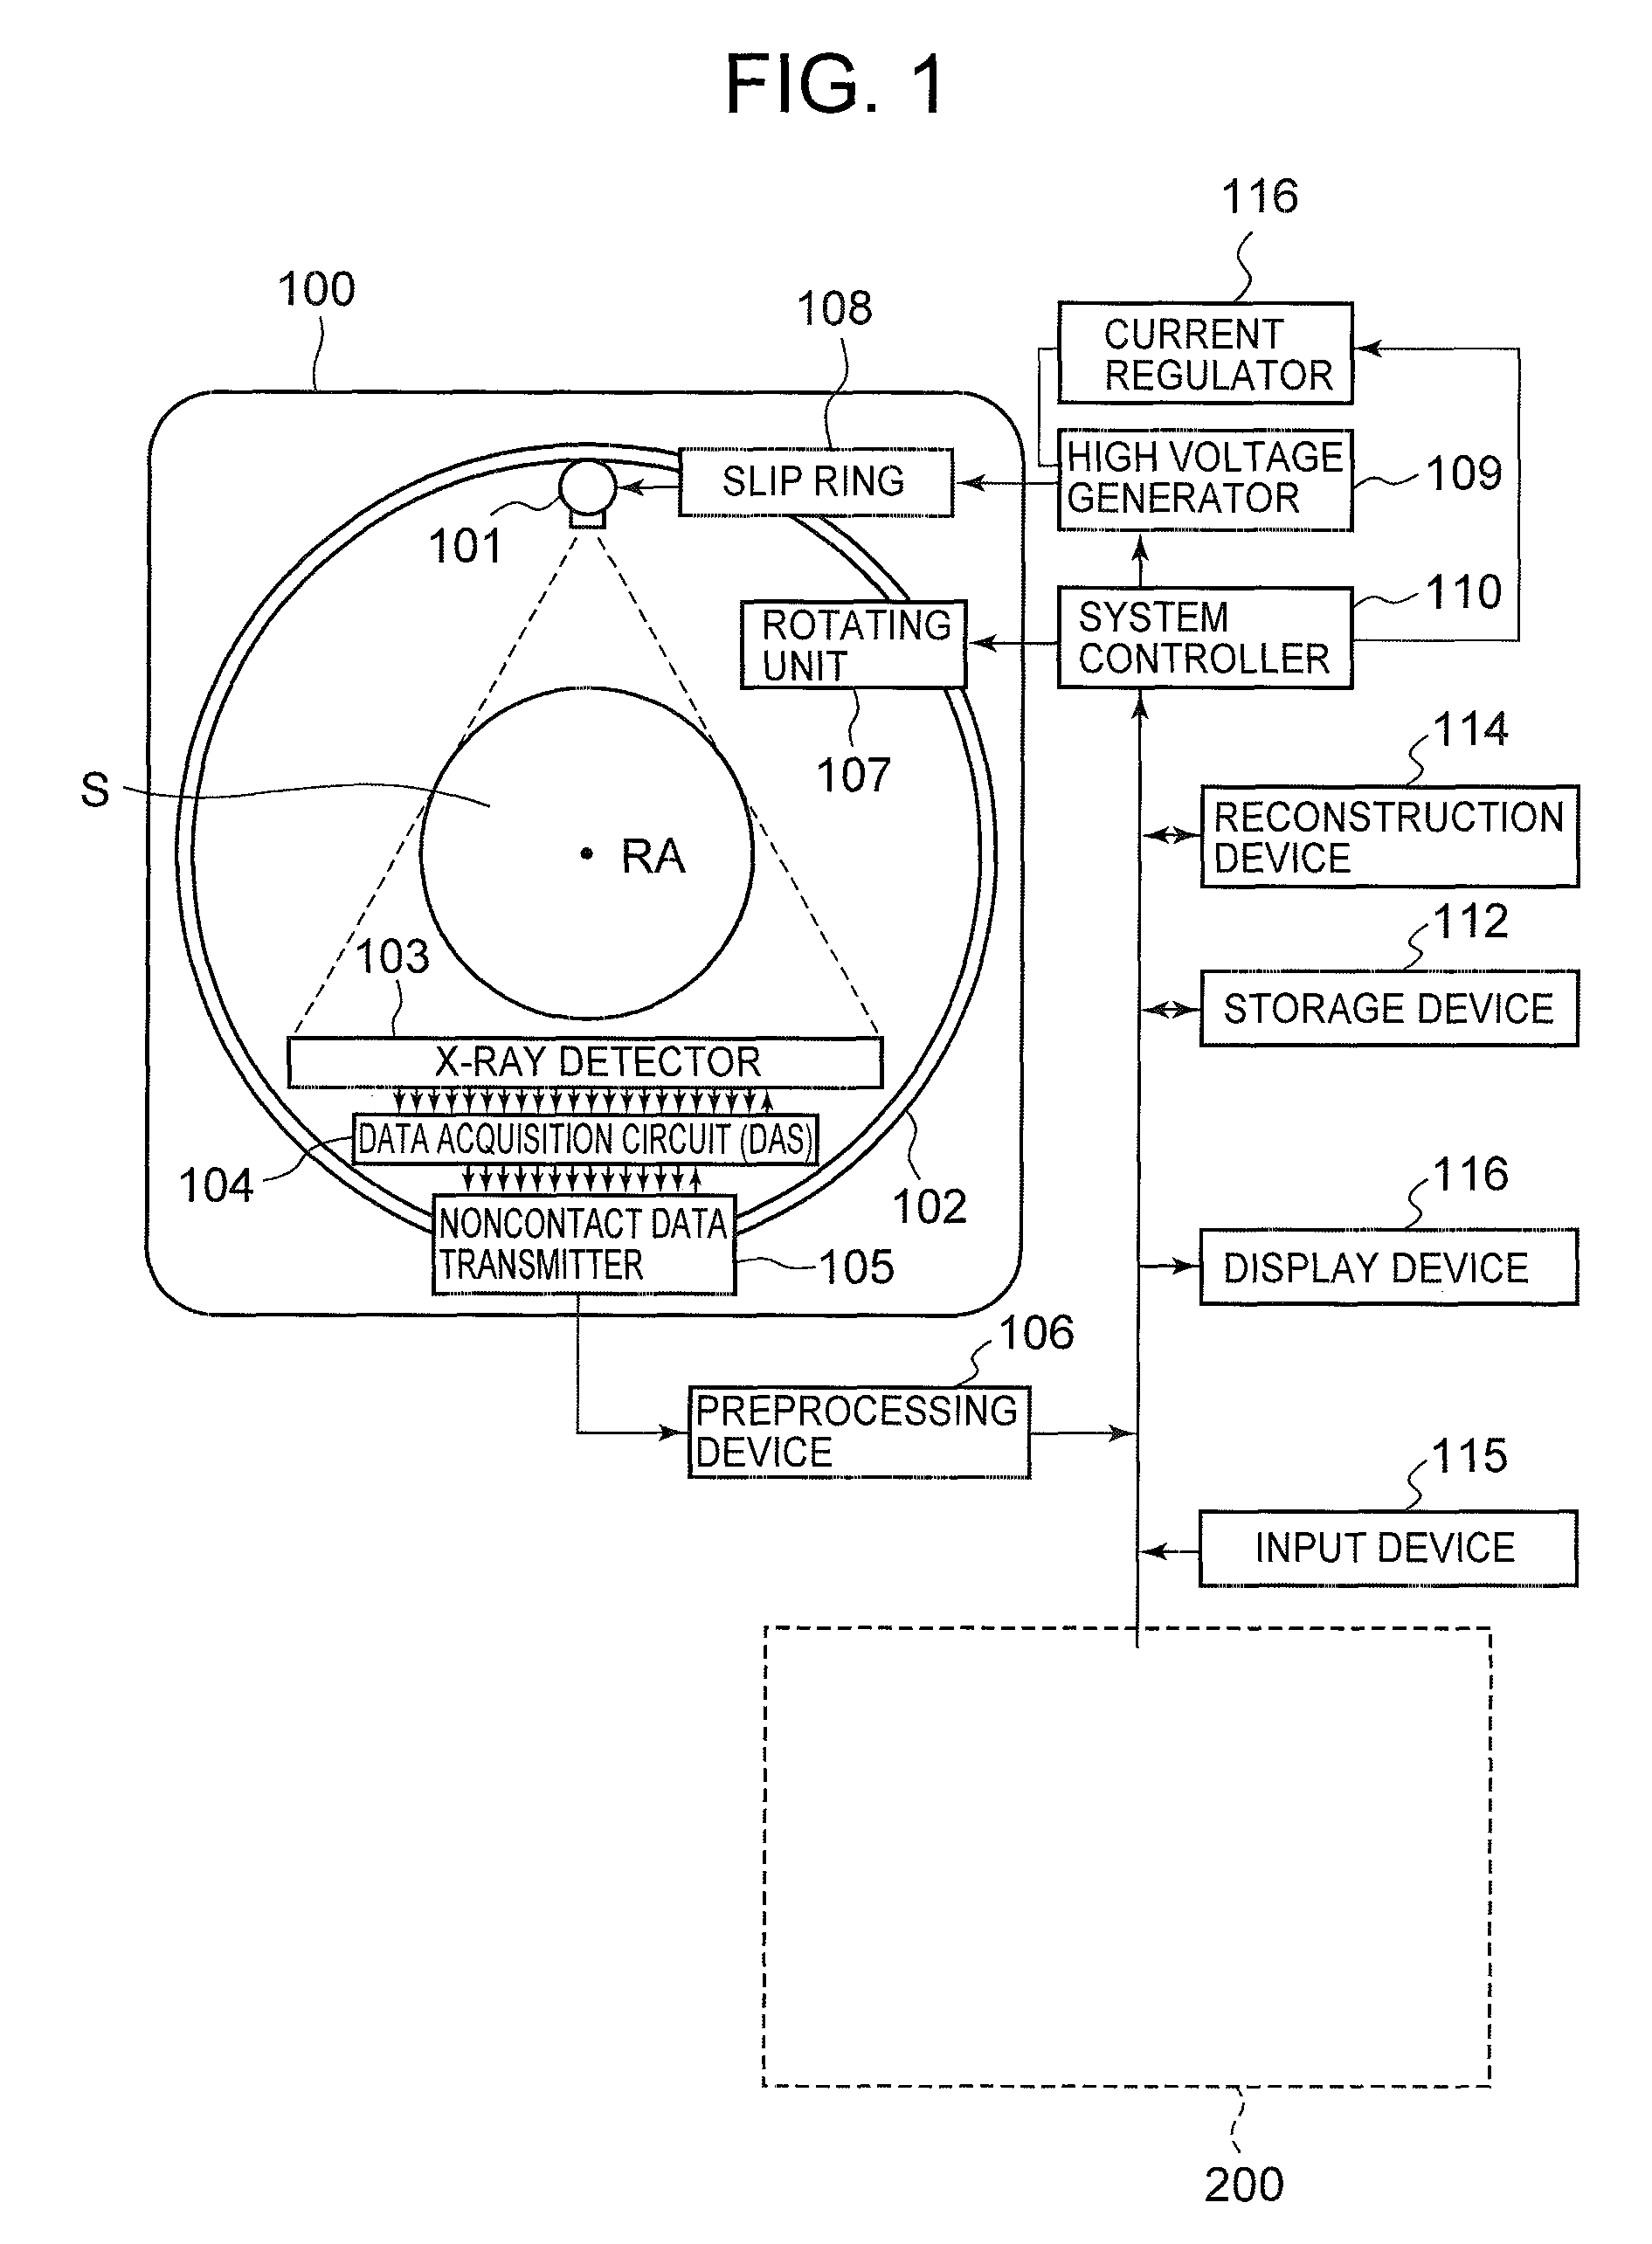 Voltage and or current modulation in dual energy computed tomography